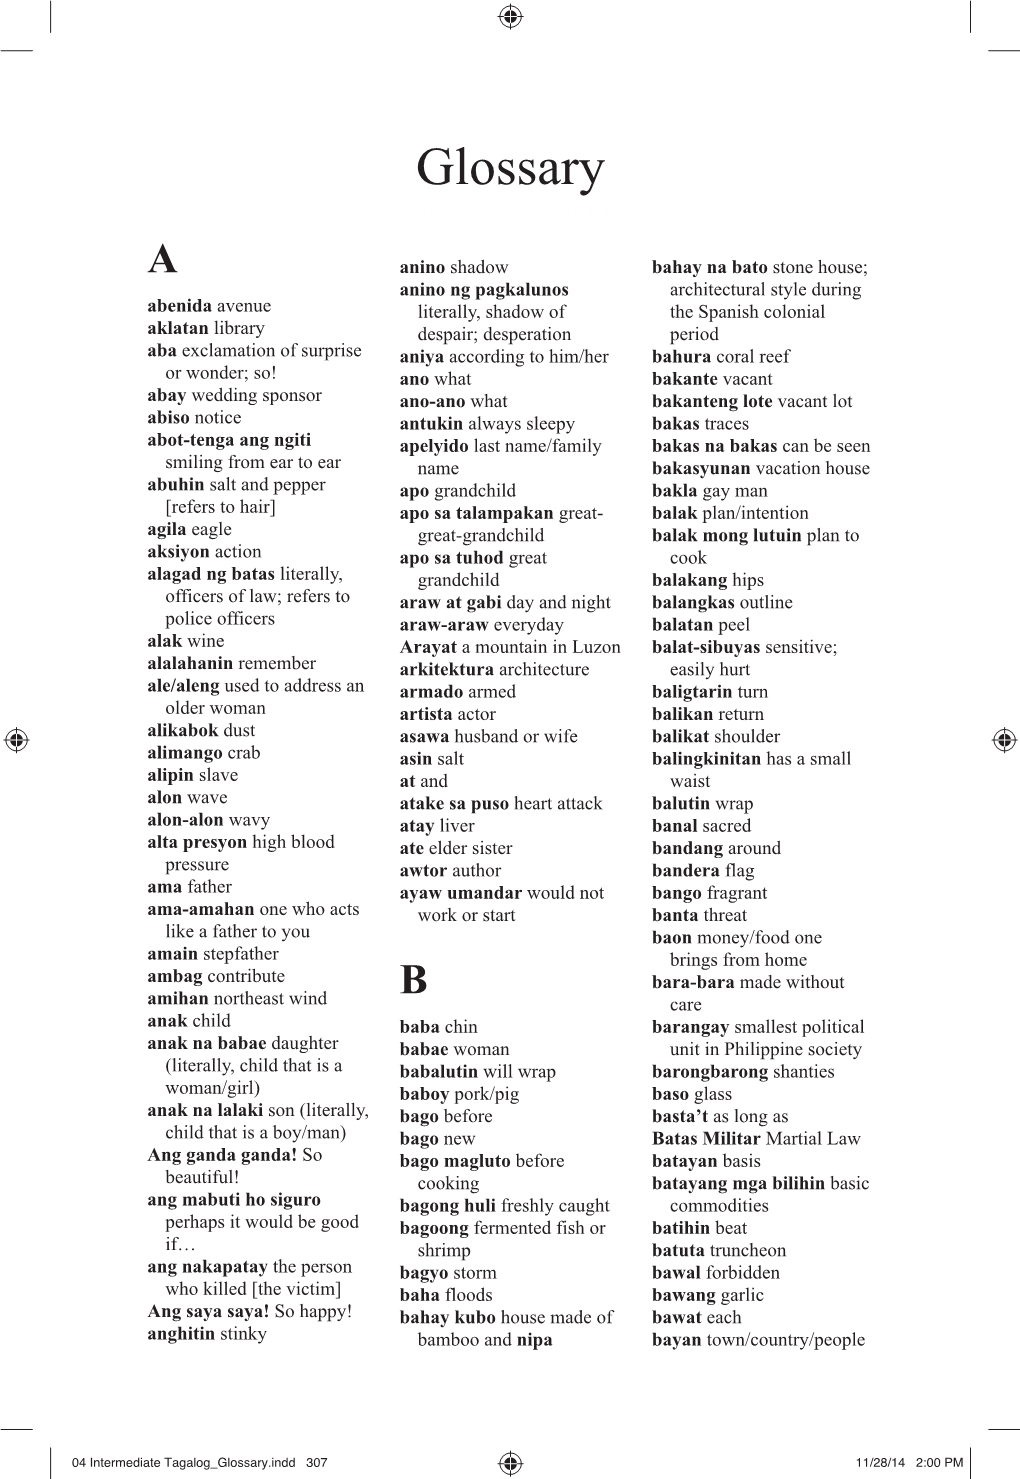 Glossary Table of Contents